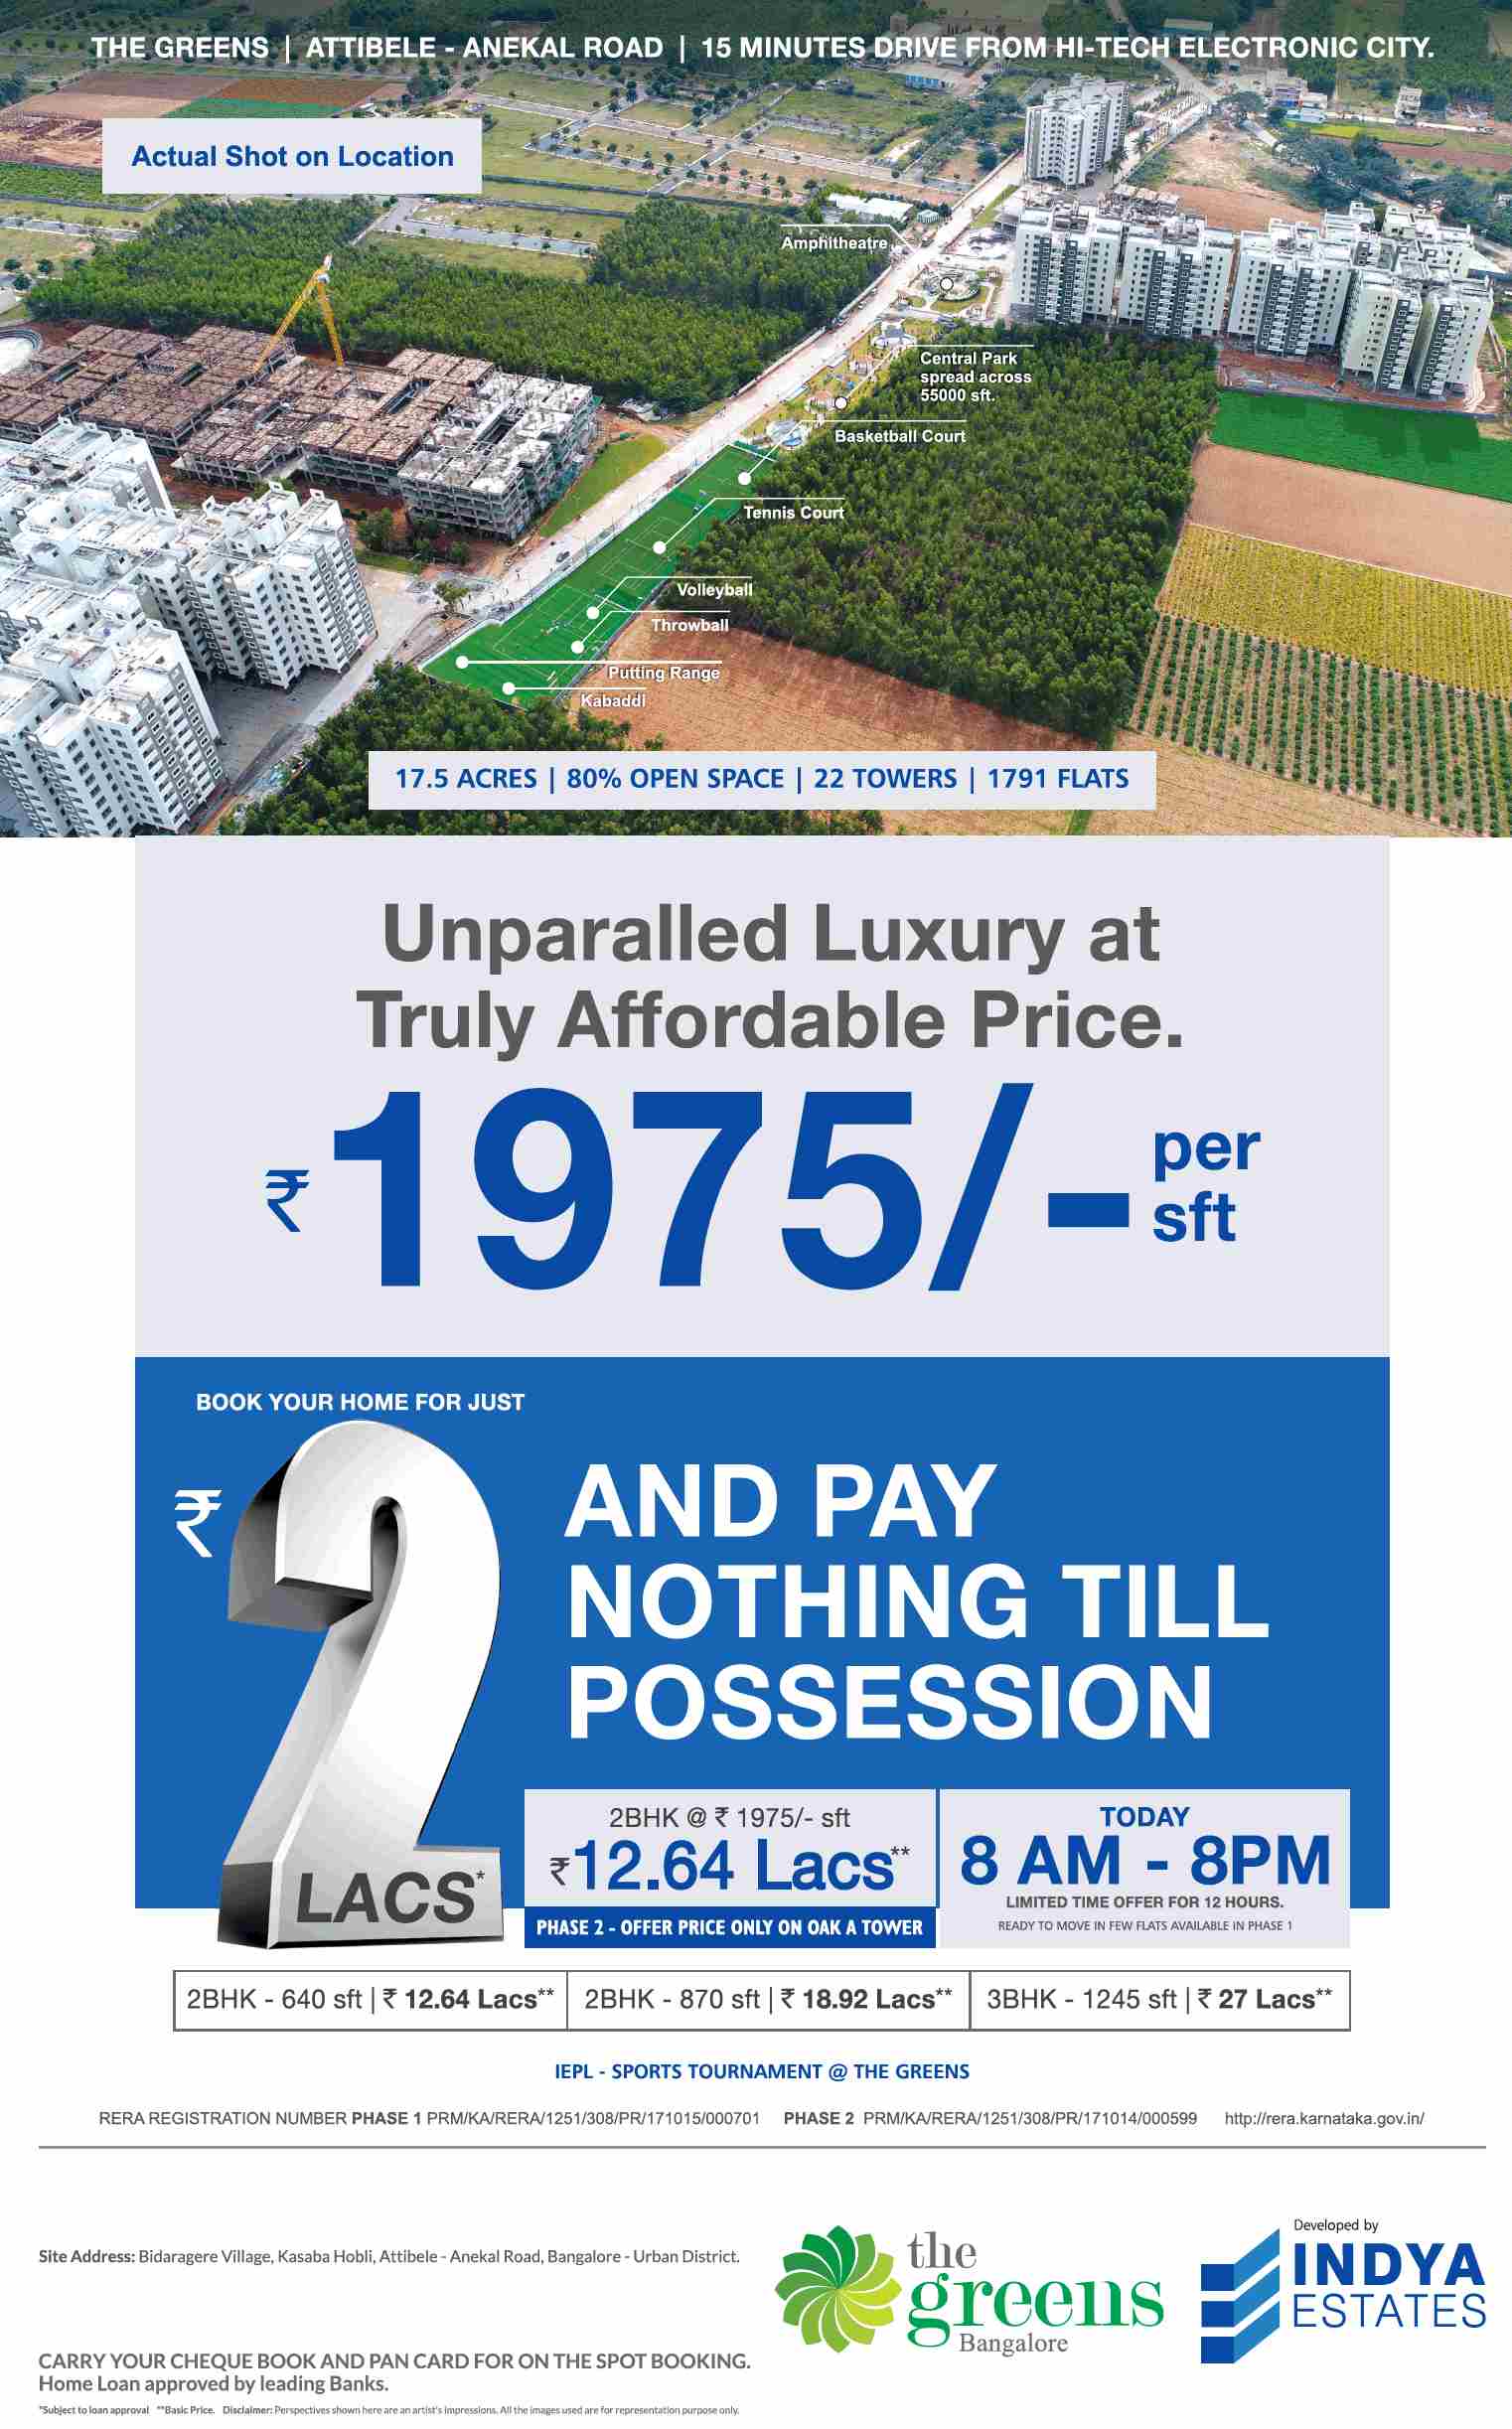 Pay Rs. 2 Lacs and nothing till possession at Indya The Greens in Bangalore